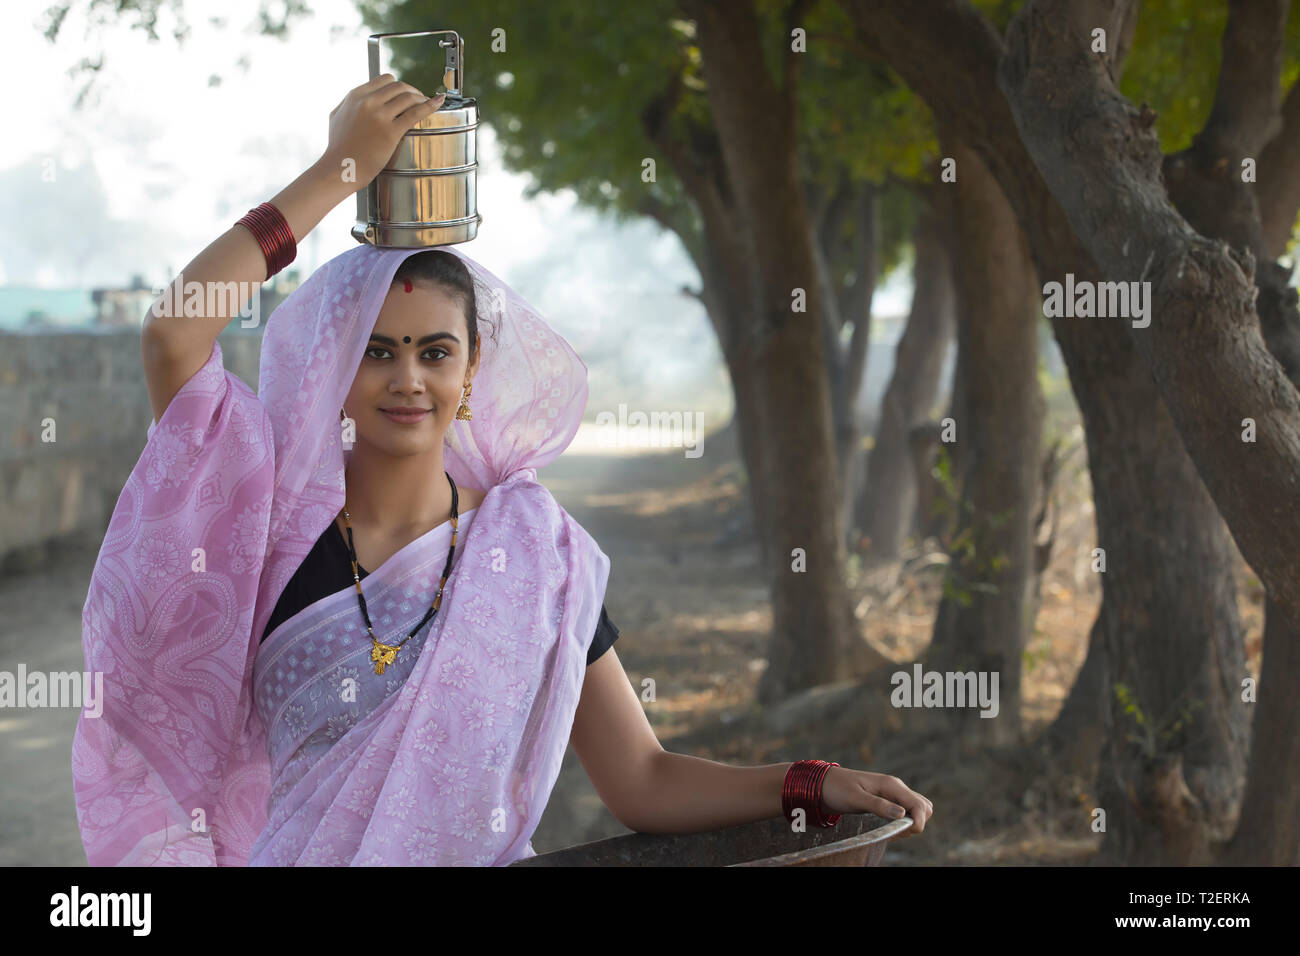 Smiling rural woman or daily wage labourer in saree carrying an iron gold pan in hand and a tiffin box on her head to work. Stock Photo